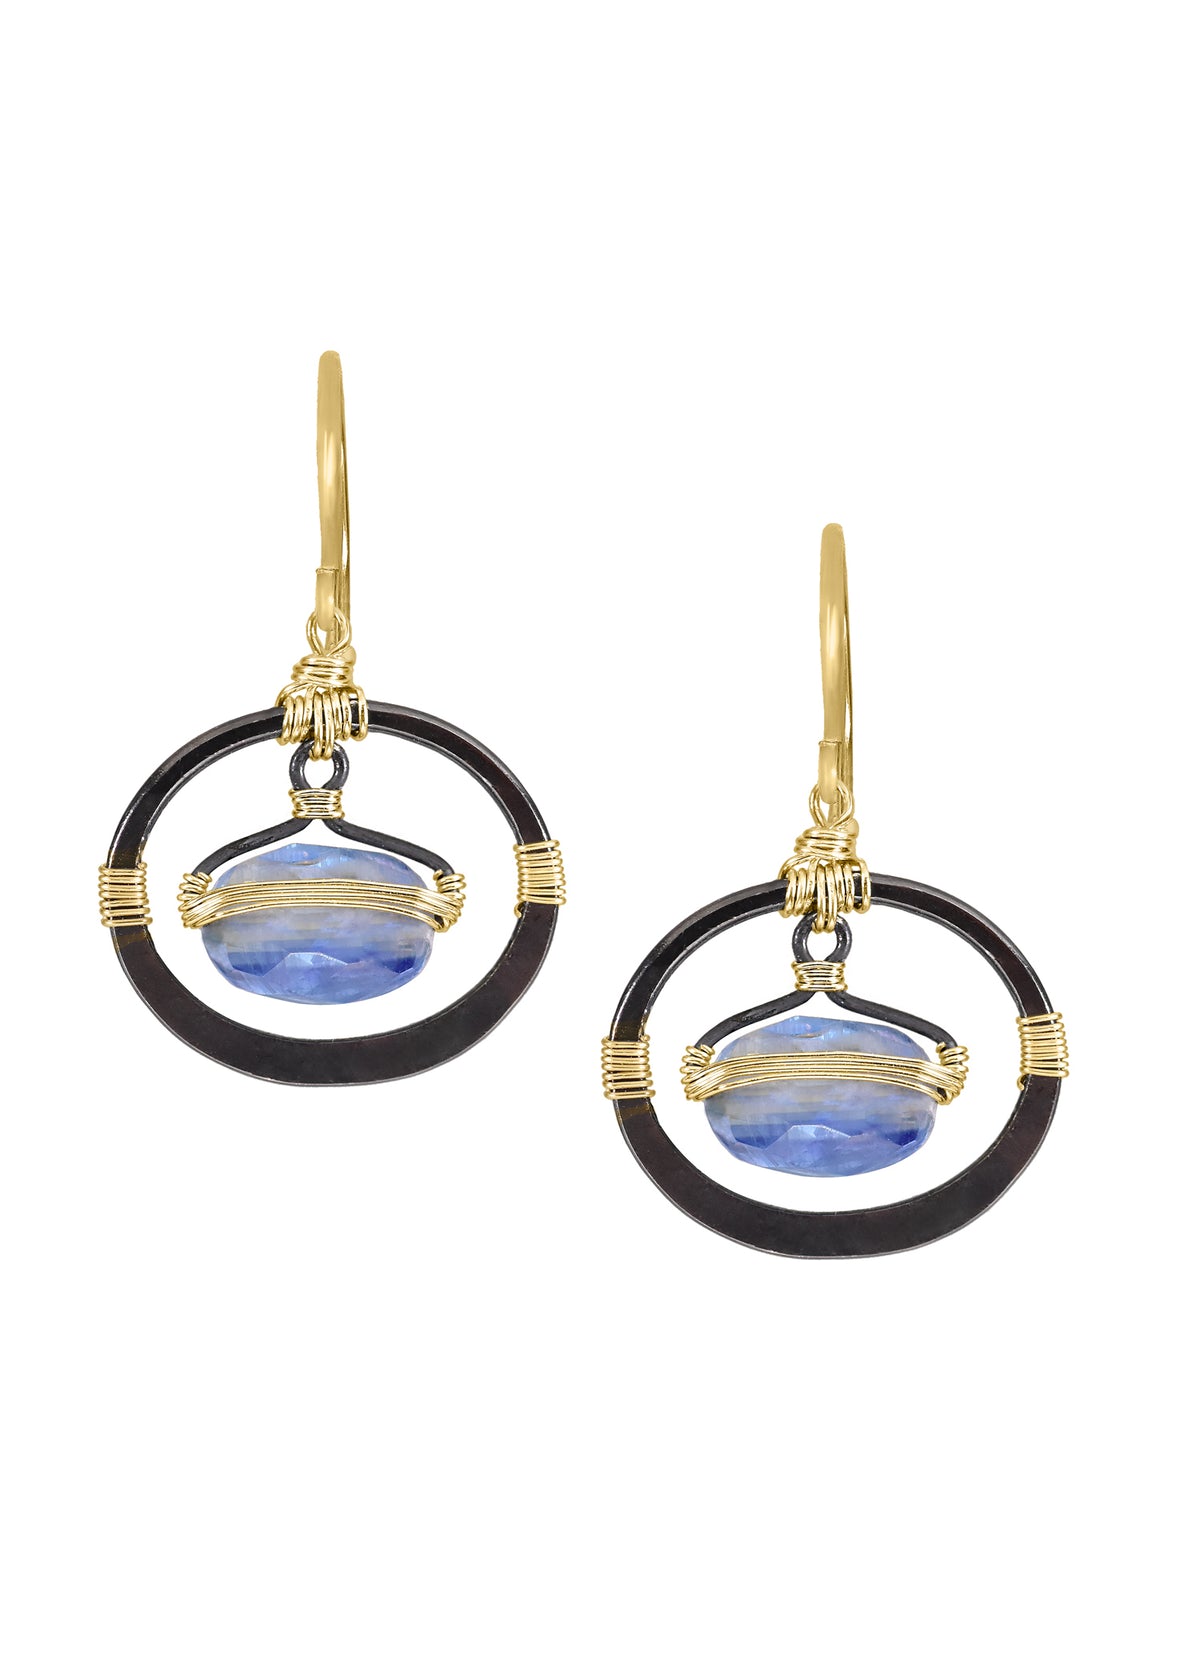 Kyanite 14k gold fill Blackened silver Mixed metal Earrings measure 1&quot; in length (including the ear wires) and 5/8&quot; in width at the widest point Handmade in our Los Angeles studio